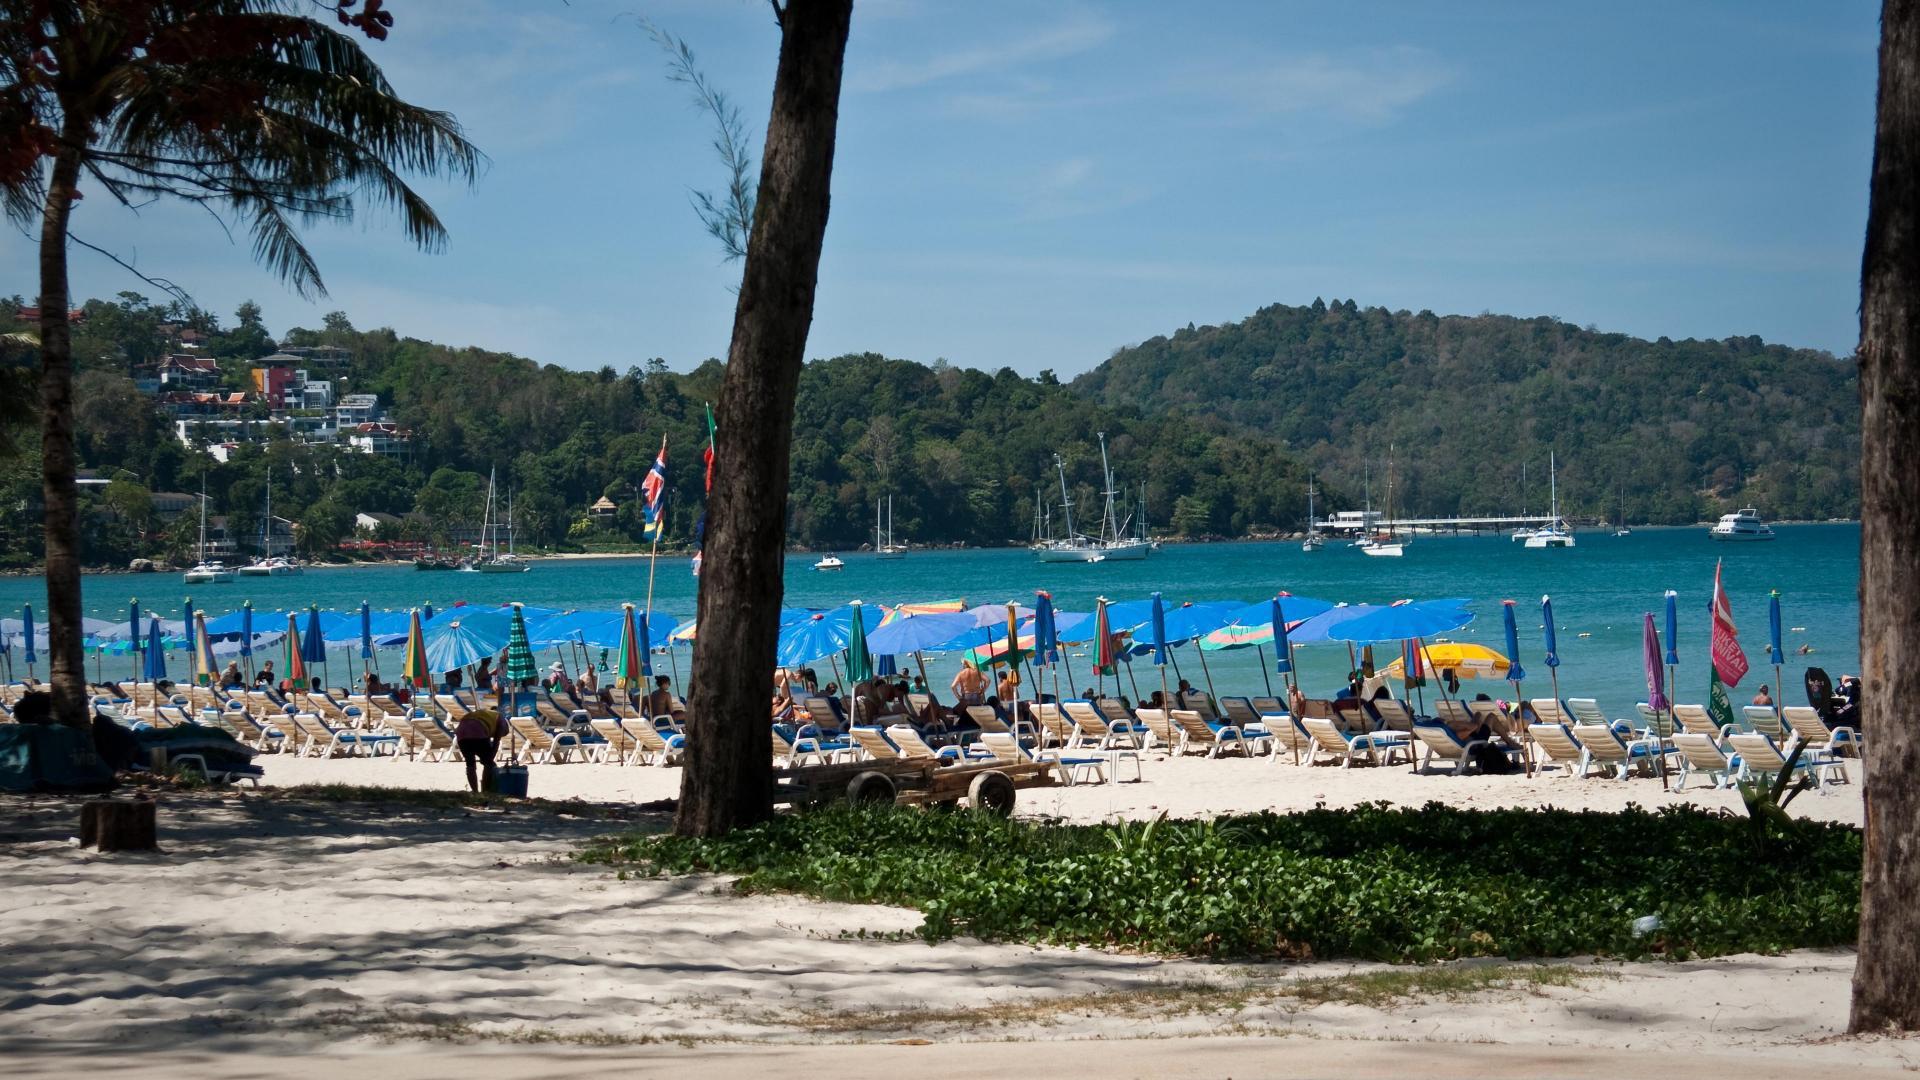 Patong Beach in Phuket wallpaper and image, picture